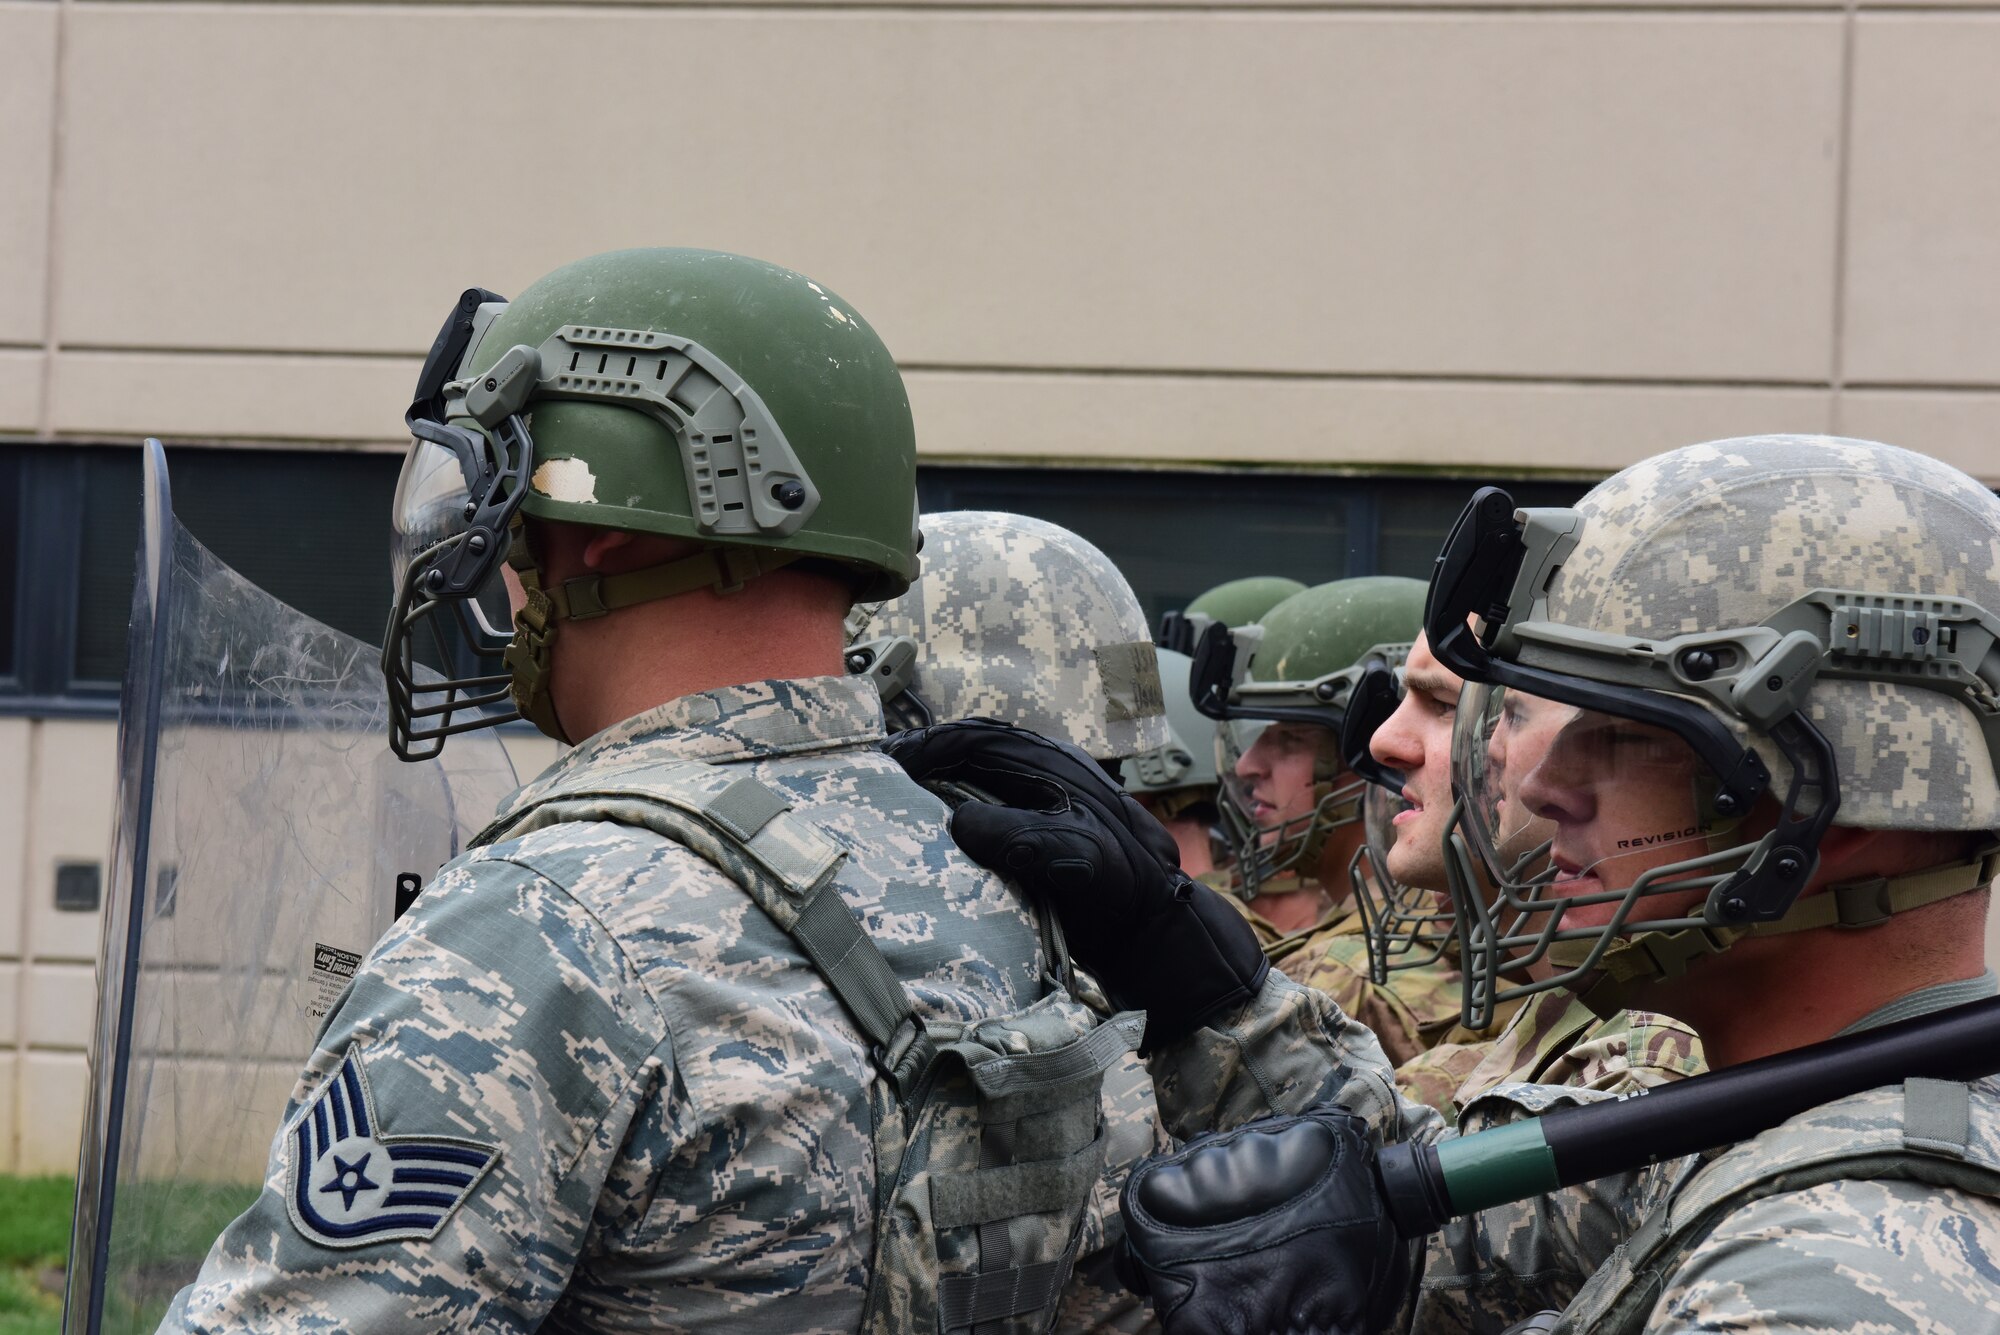 Security forces specialists from the 193rd Special Operations Security Forces Squadron, Middletown, Pennsylvania, Pennsylvania Air National Guard, conduct riot control countermeasures training July 22, 2018. The 193rd SOSFS Airmen participate in this two times a year as part of their required domestic operations training. (U.S. Air National Guard photo by Senior Airman Rachel Loftis/Released)